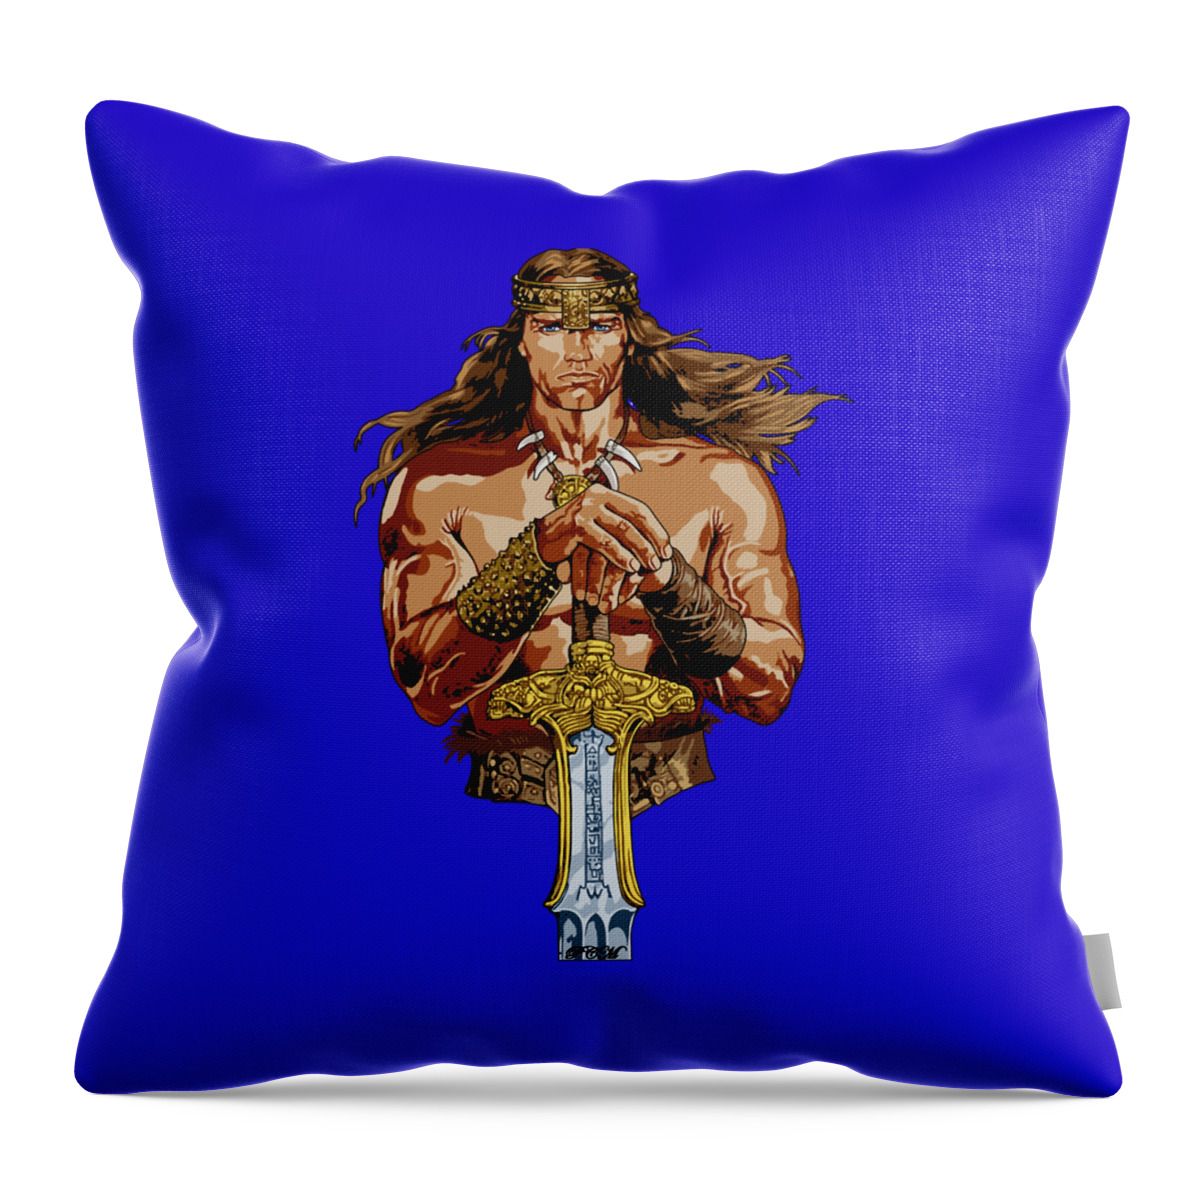 Conan The Barbarian Throw Pillow featuring the digital art Gifts For Women The Barbarian by Lotus Leafal